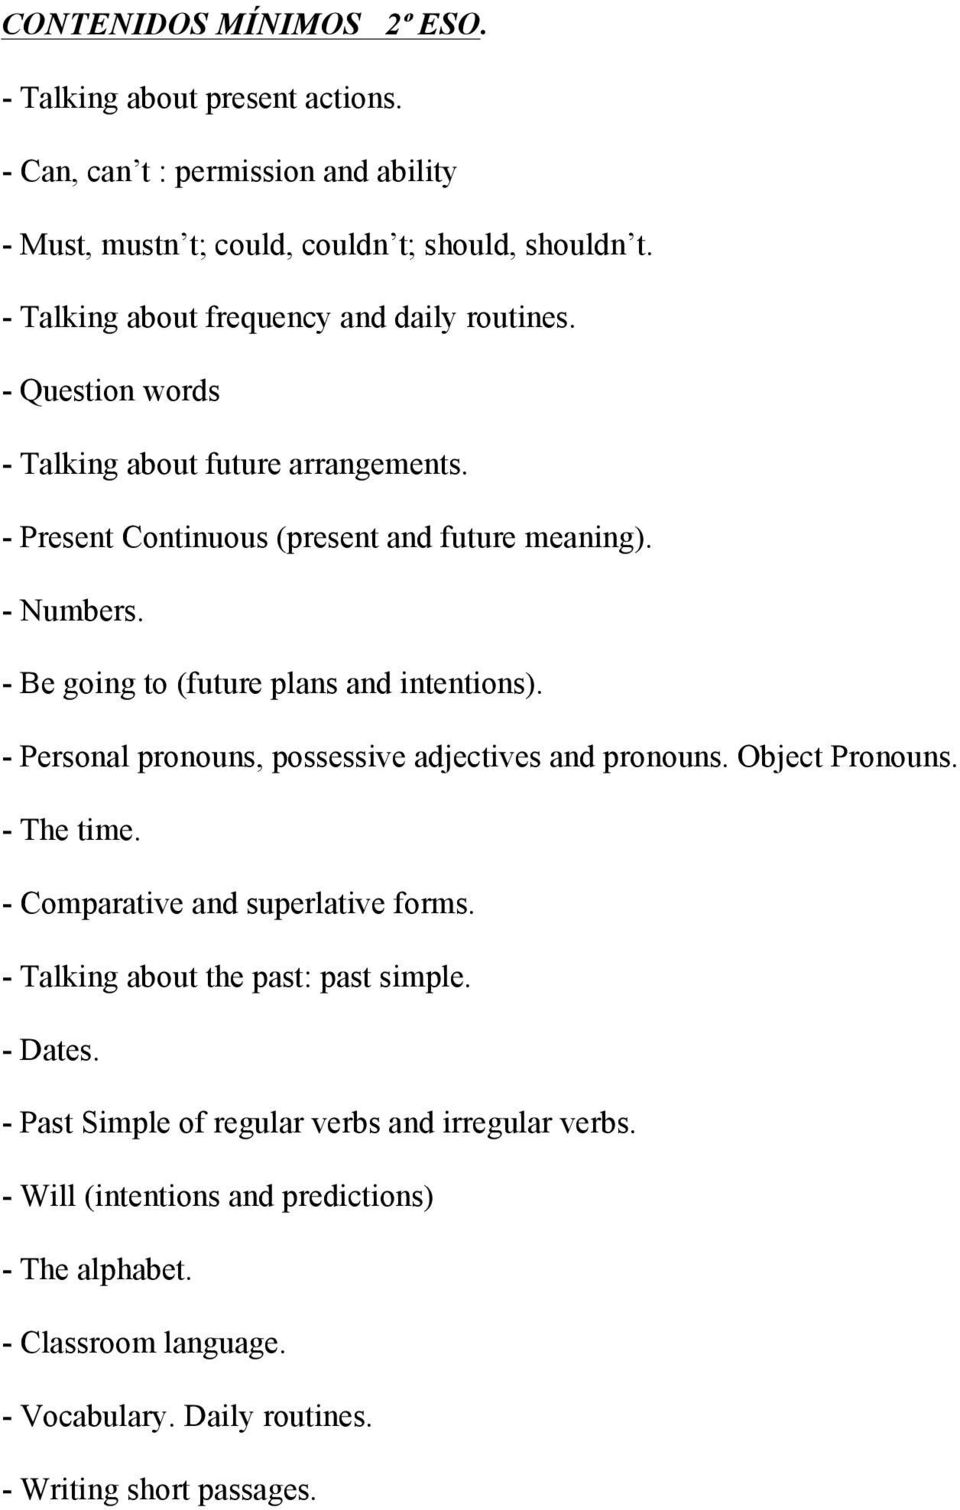 - Be going to (future plans and intentions). - Personal pronouns, possessive adjectives and pronouns. Object Pronouns. - The time. - Comparative and superlative forms.